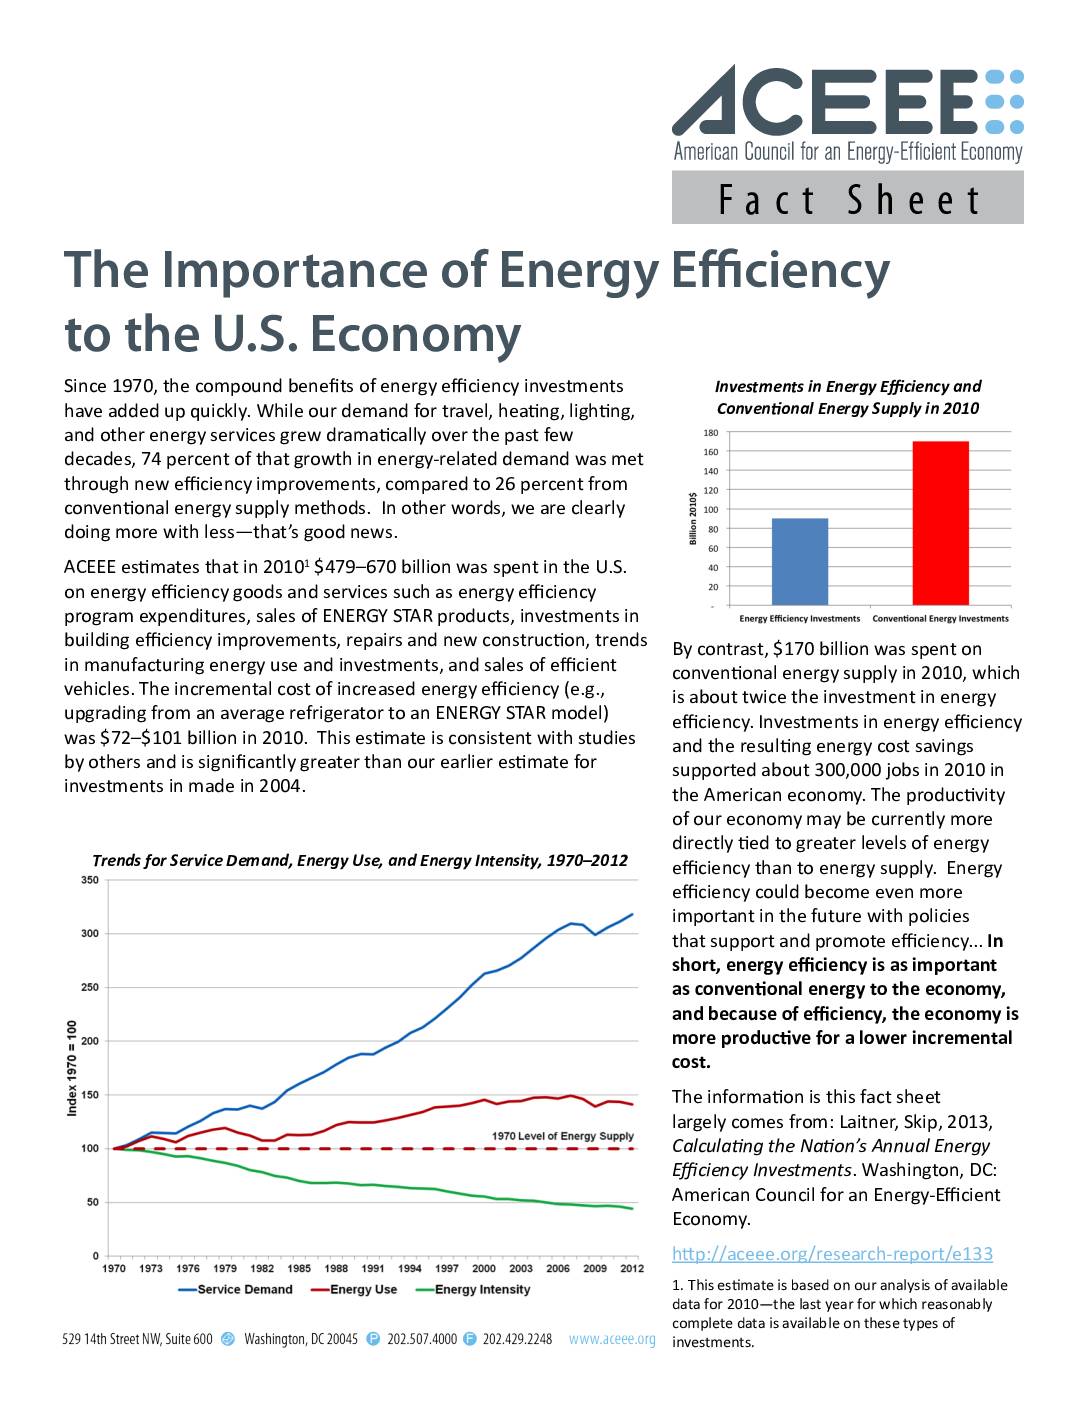 The Importance of Energy Efficiency to the U.S. Economy